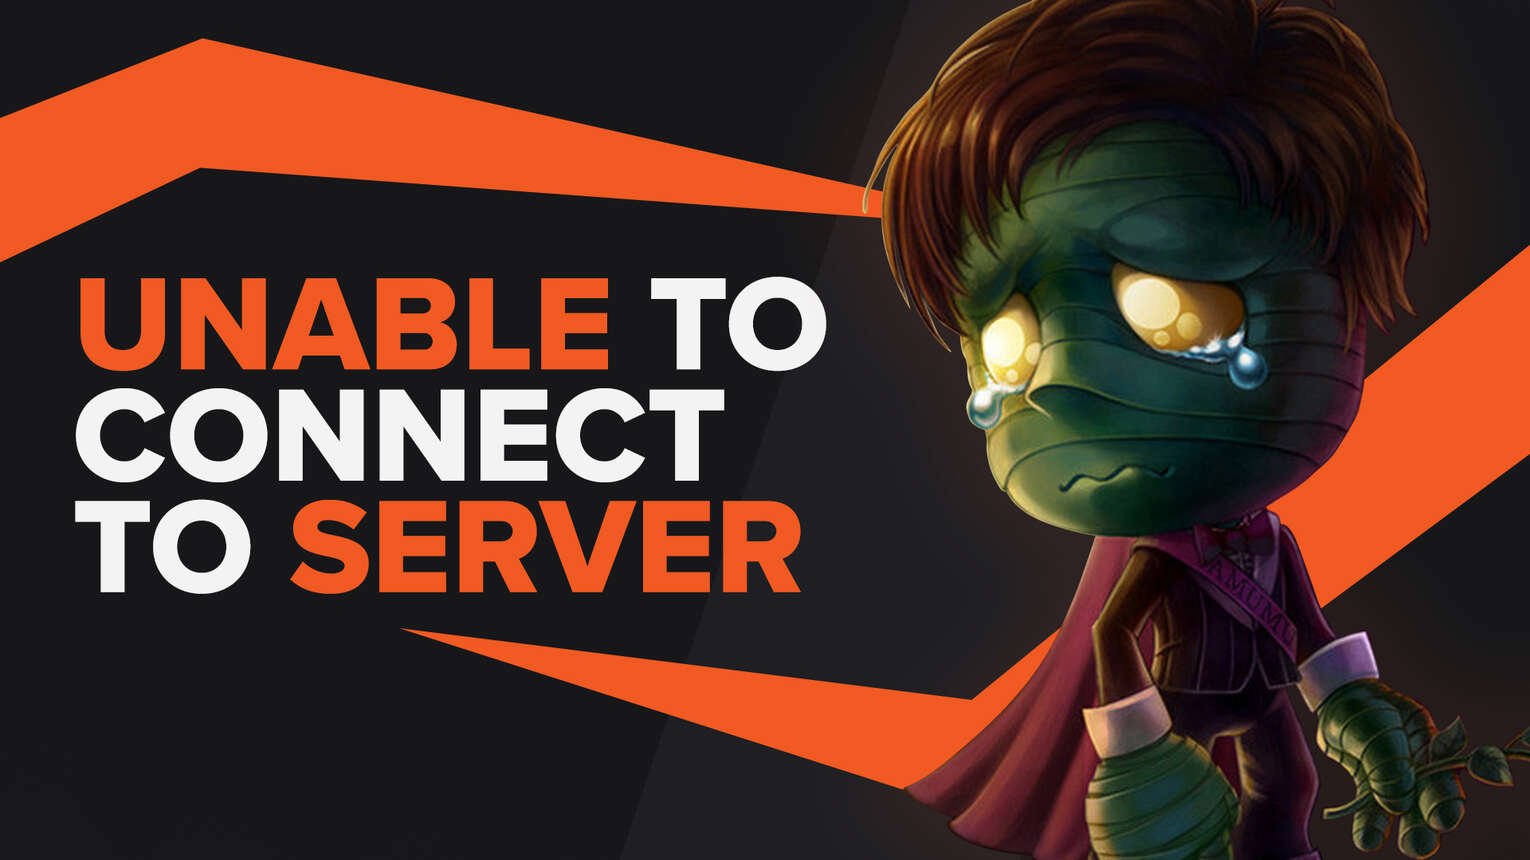 League of Legends: Unable to connect to session service error fix -  GameRevolution